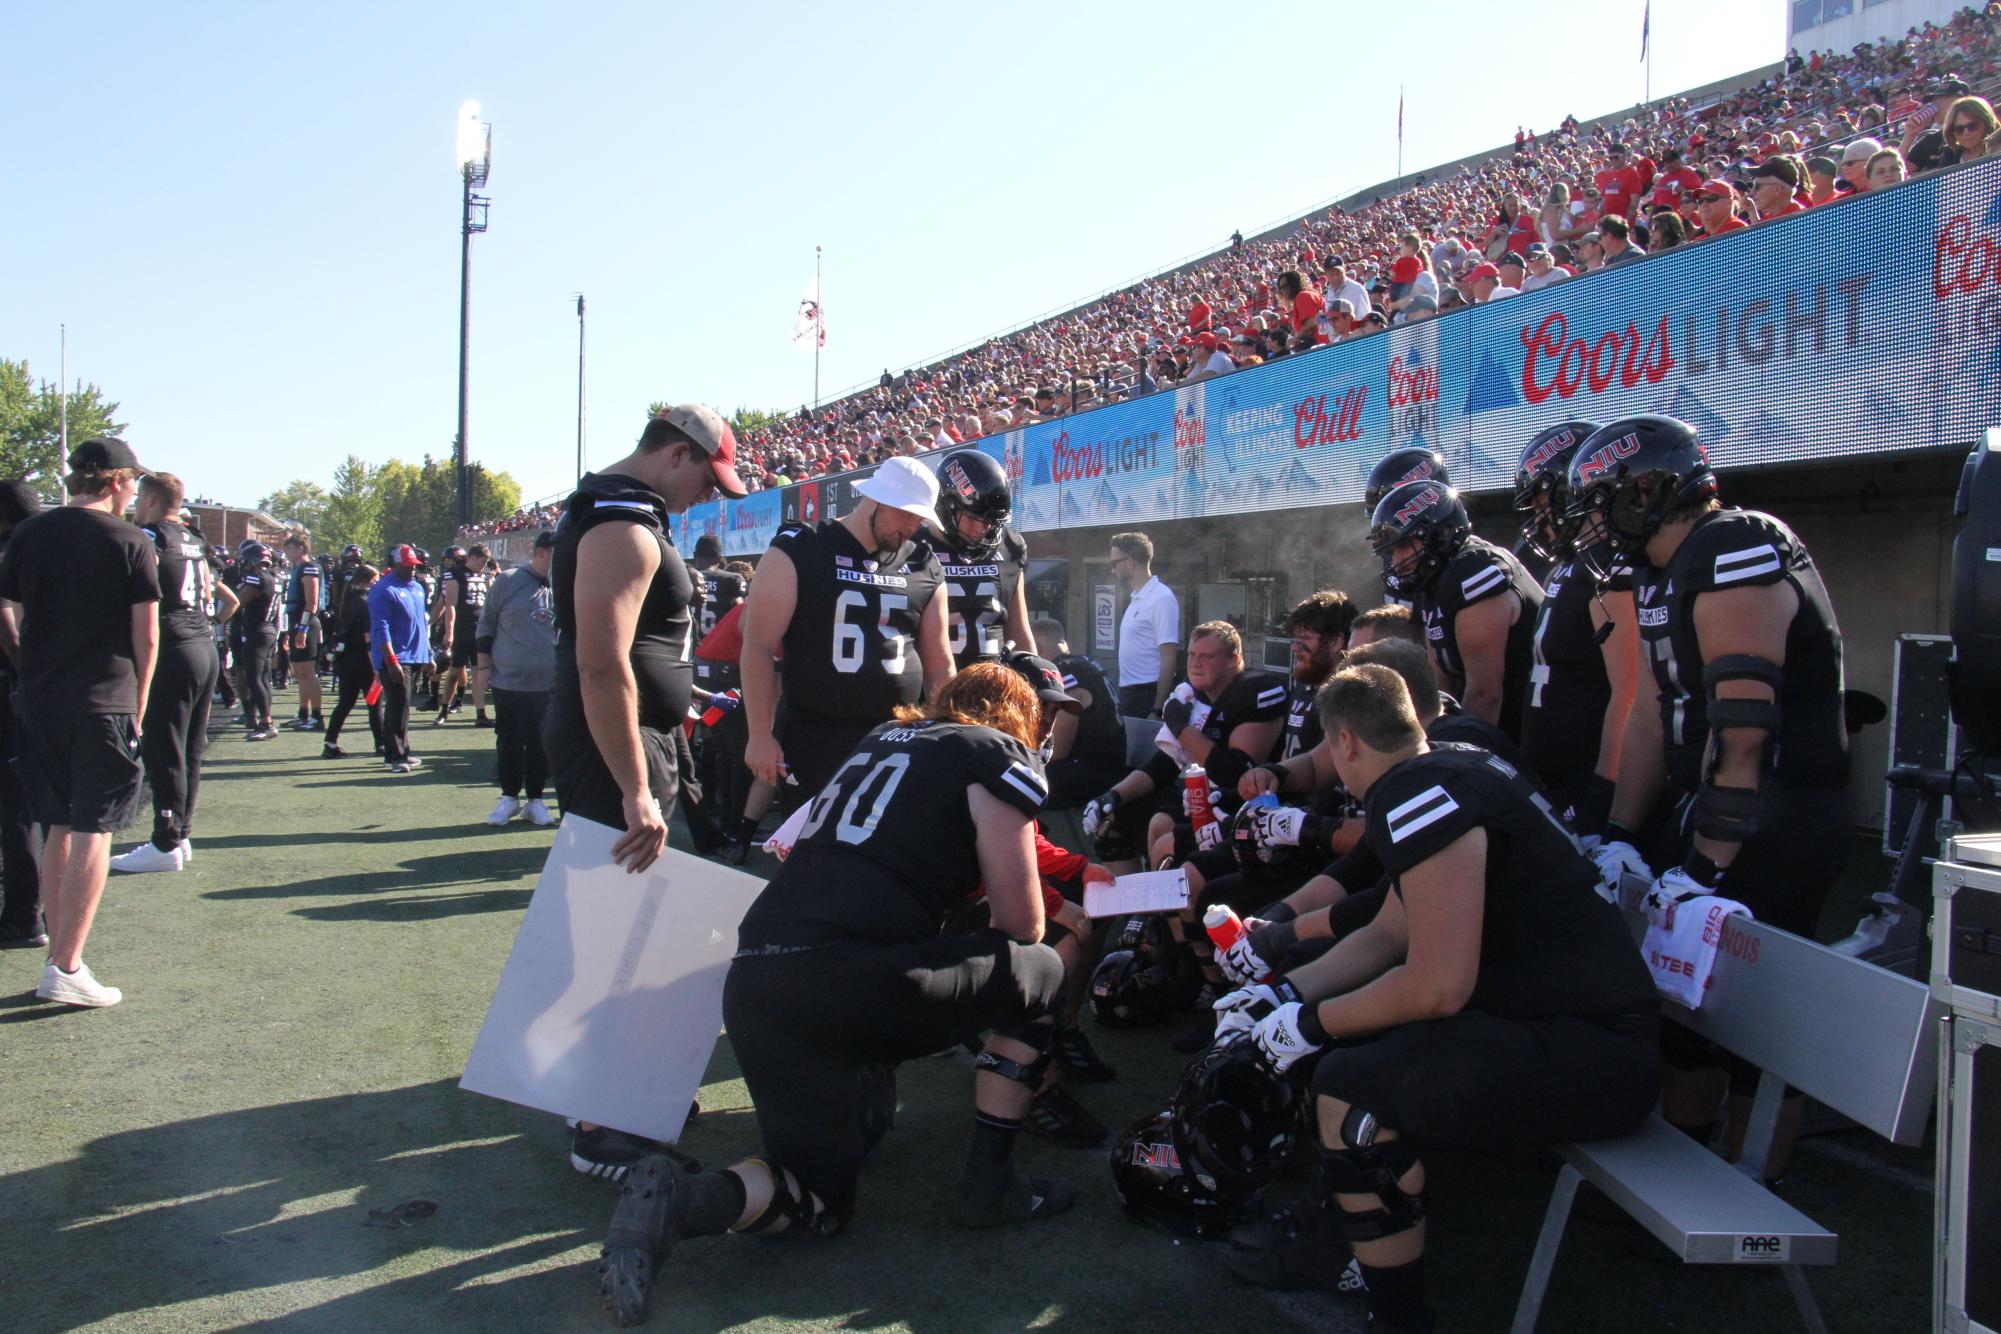 The Huskies offensive line has a team discussion in the third quarter on Sept. 9 against Southern Illinois University. The Huskies were defeated 14-11. (Nyla Owens | Northern Star)